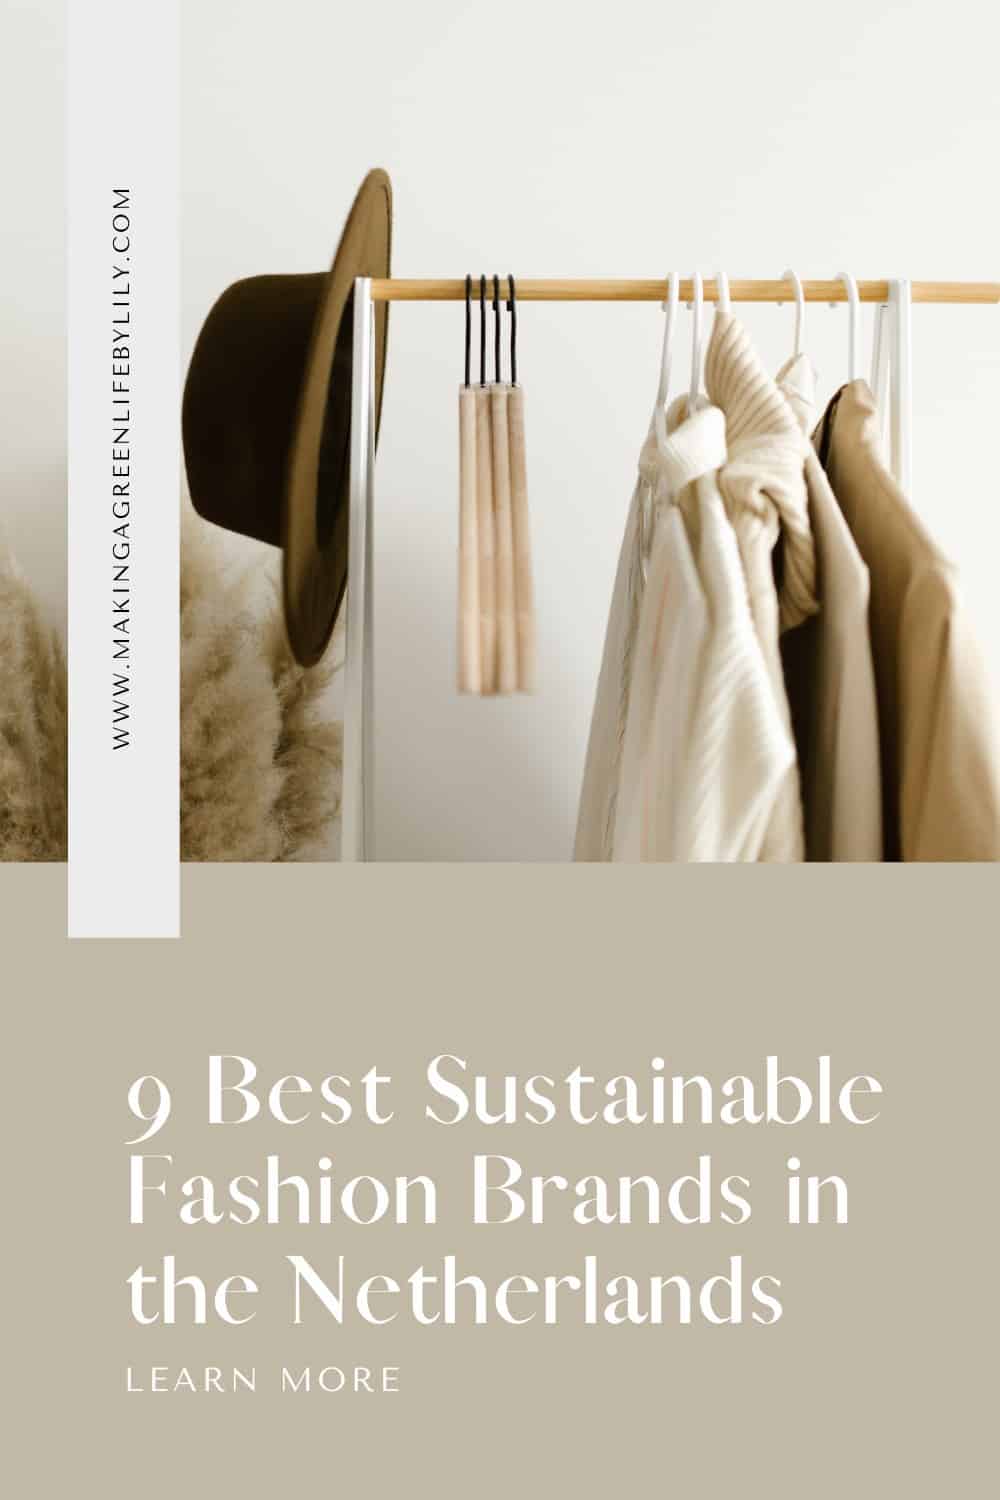 9 Best Sustainable Fashion Brands in the Netherlands